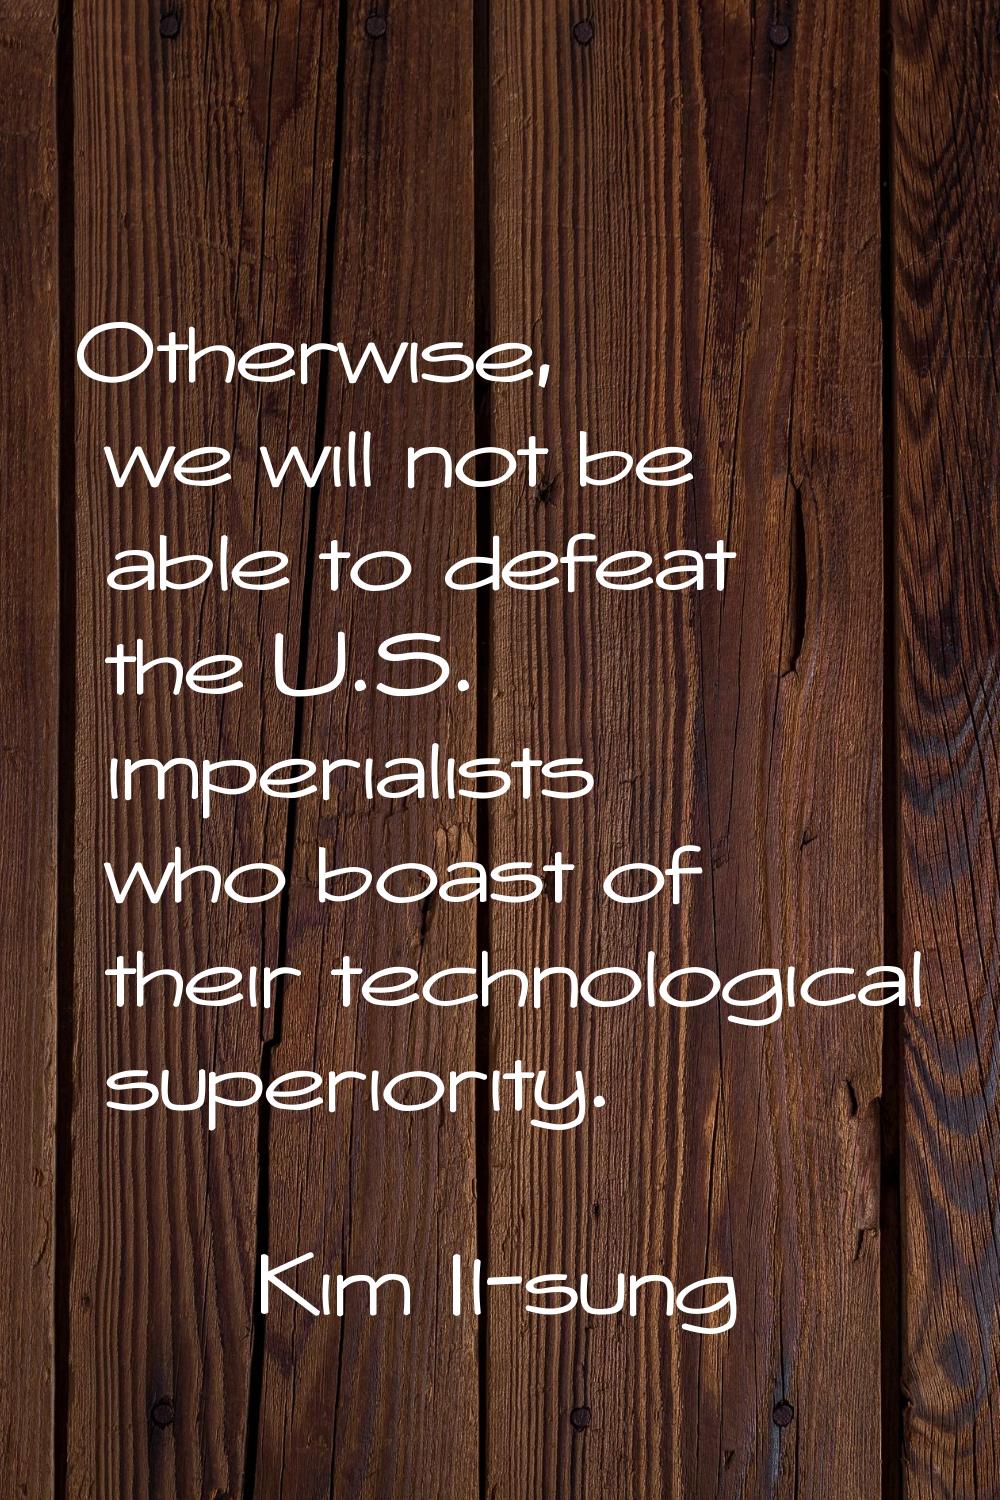 Otherwise, we will not be able to defeat the U.S. imperialists who boast of their technological sup